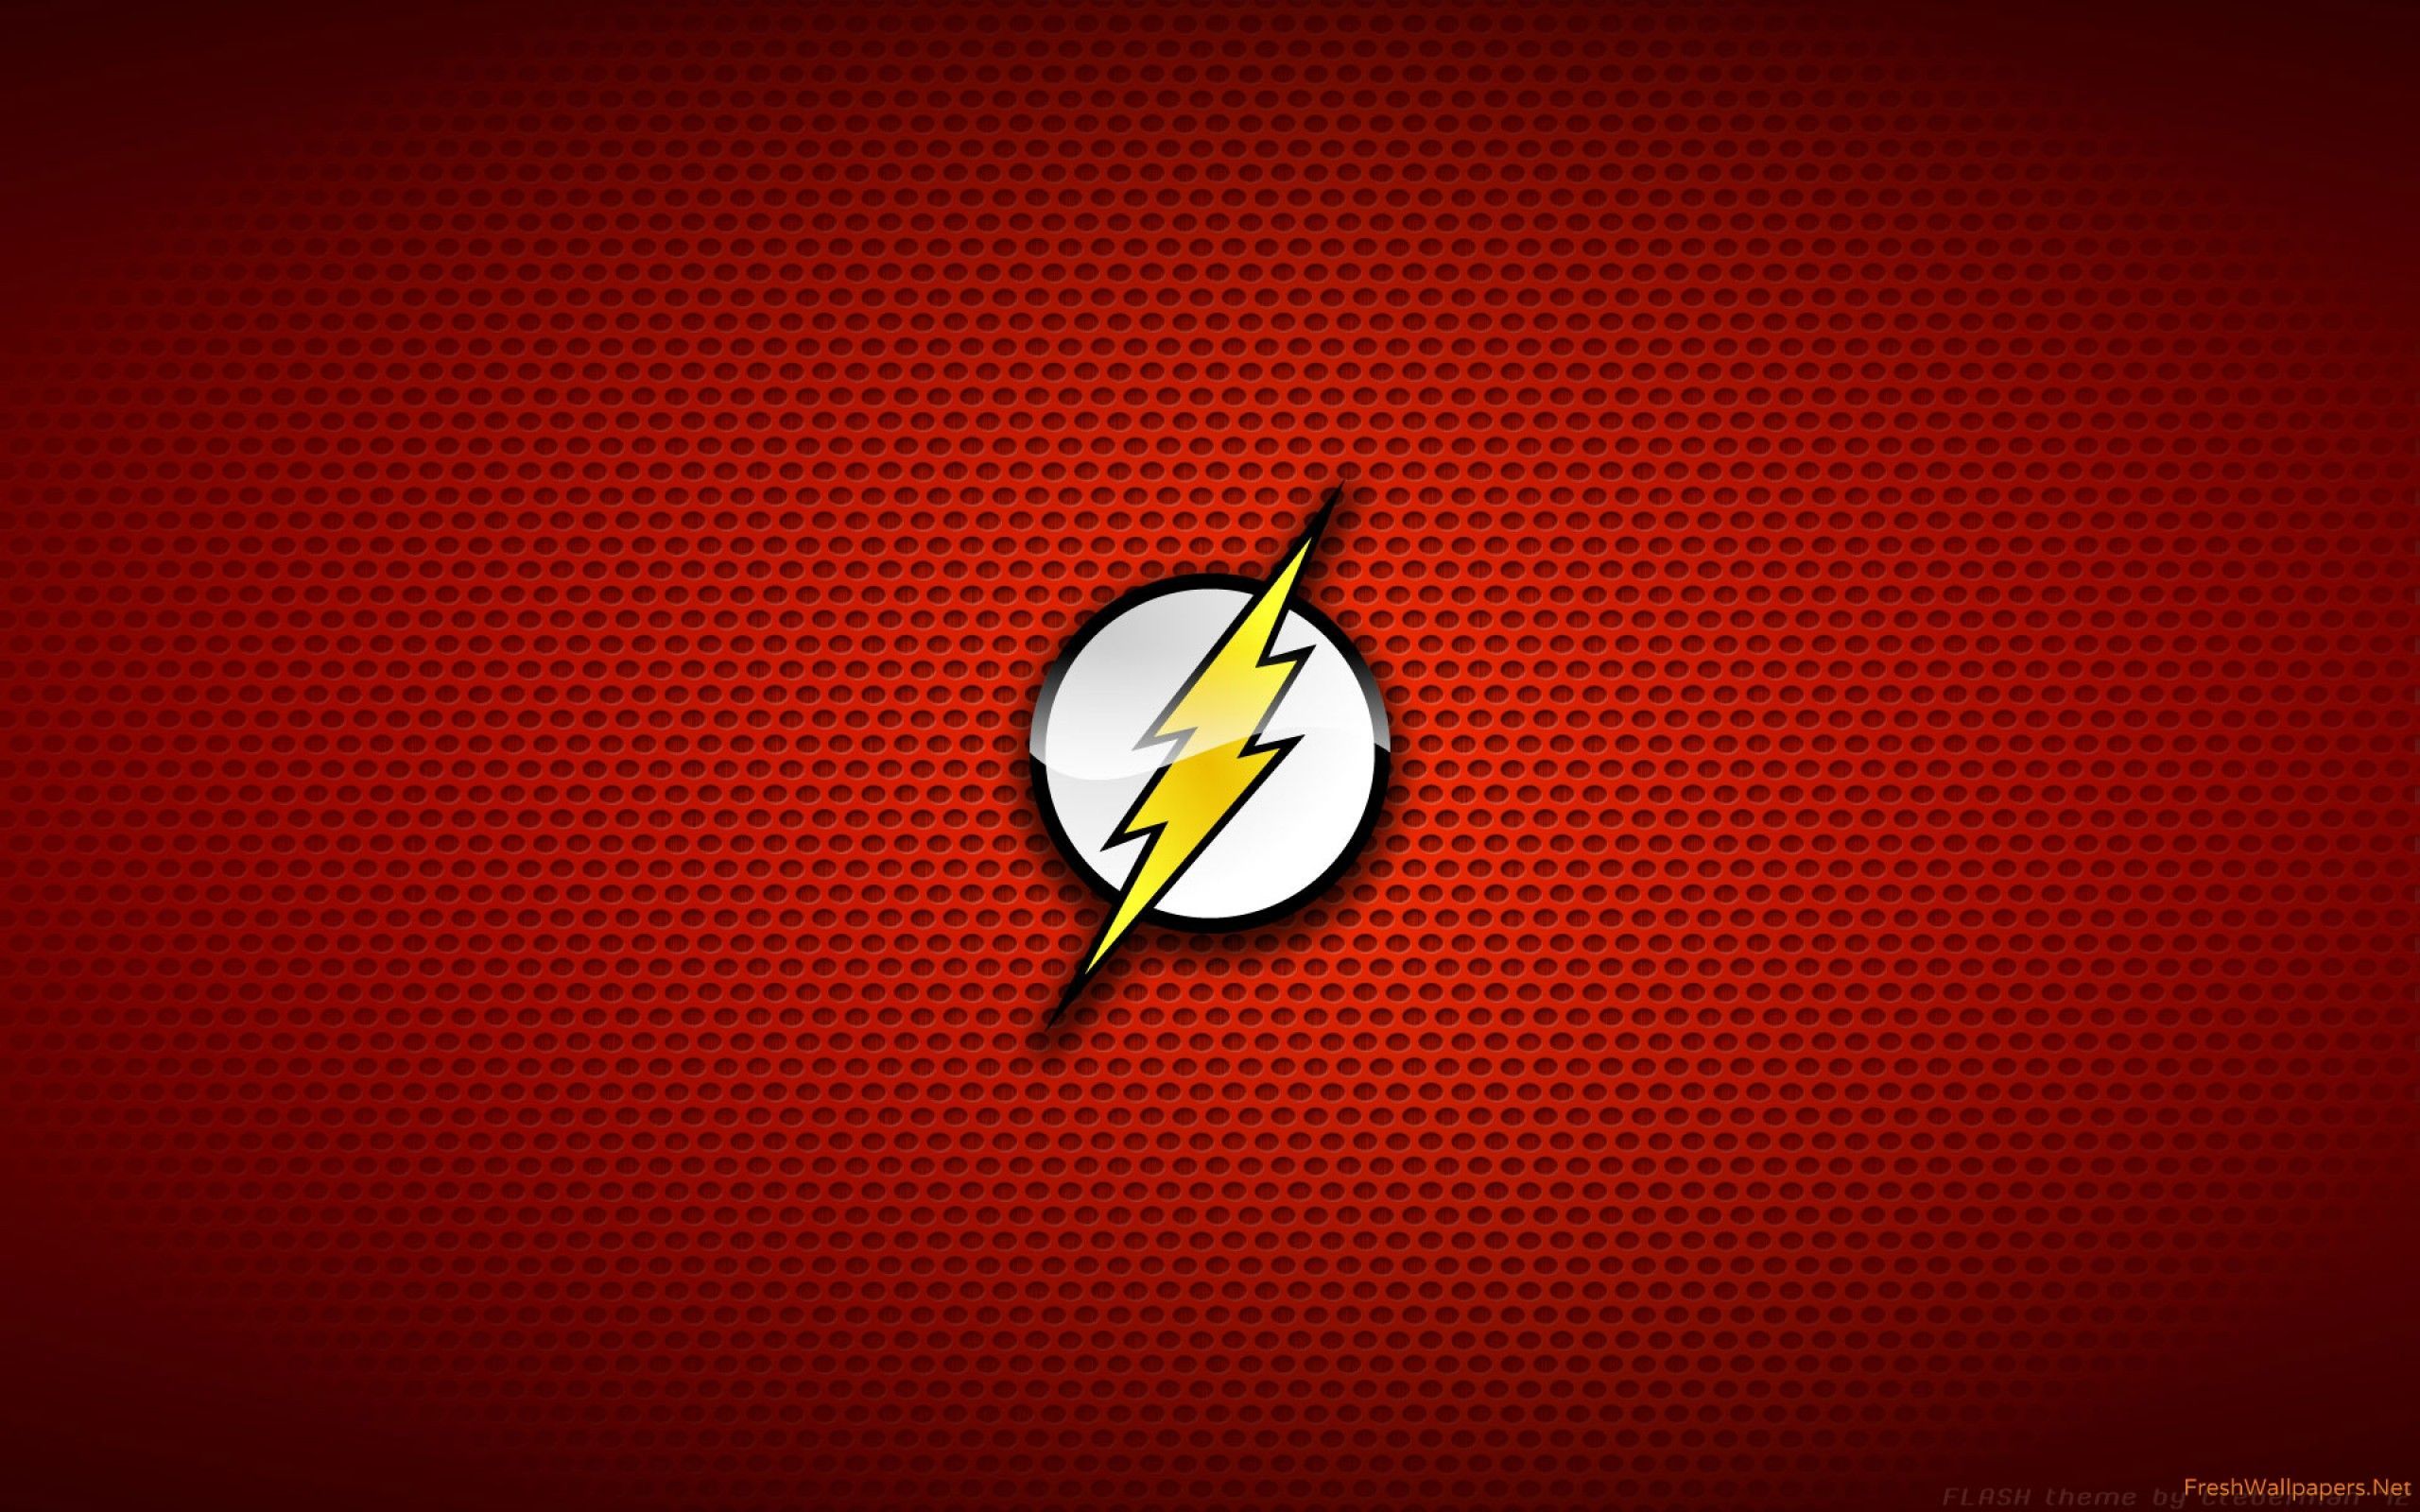 The Flash 2014 HD Wallpaper wallpapers | Freshwallpapers